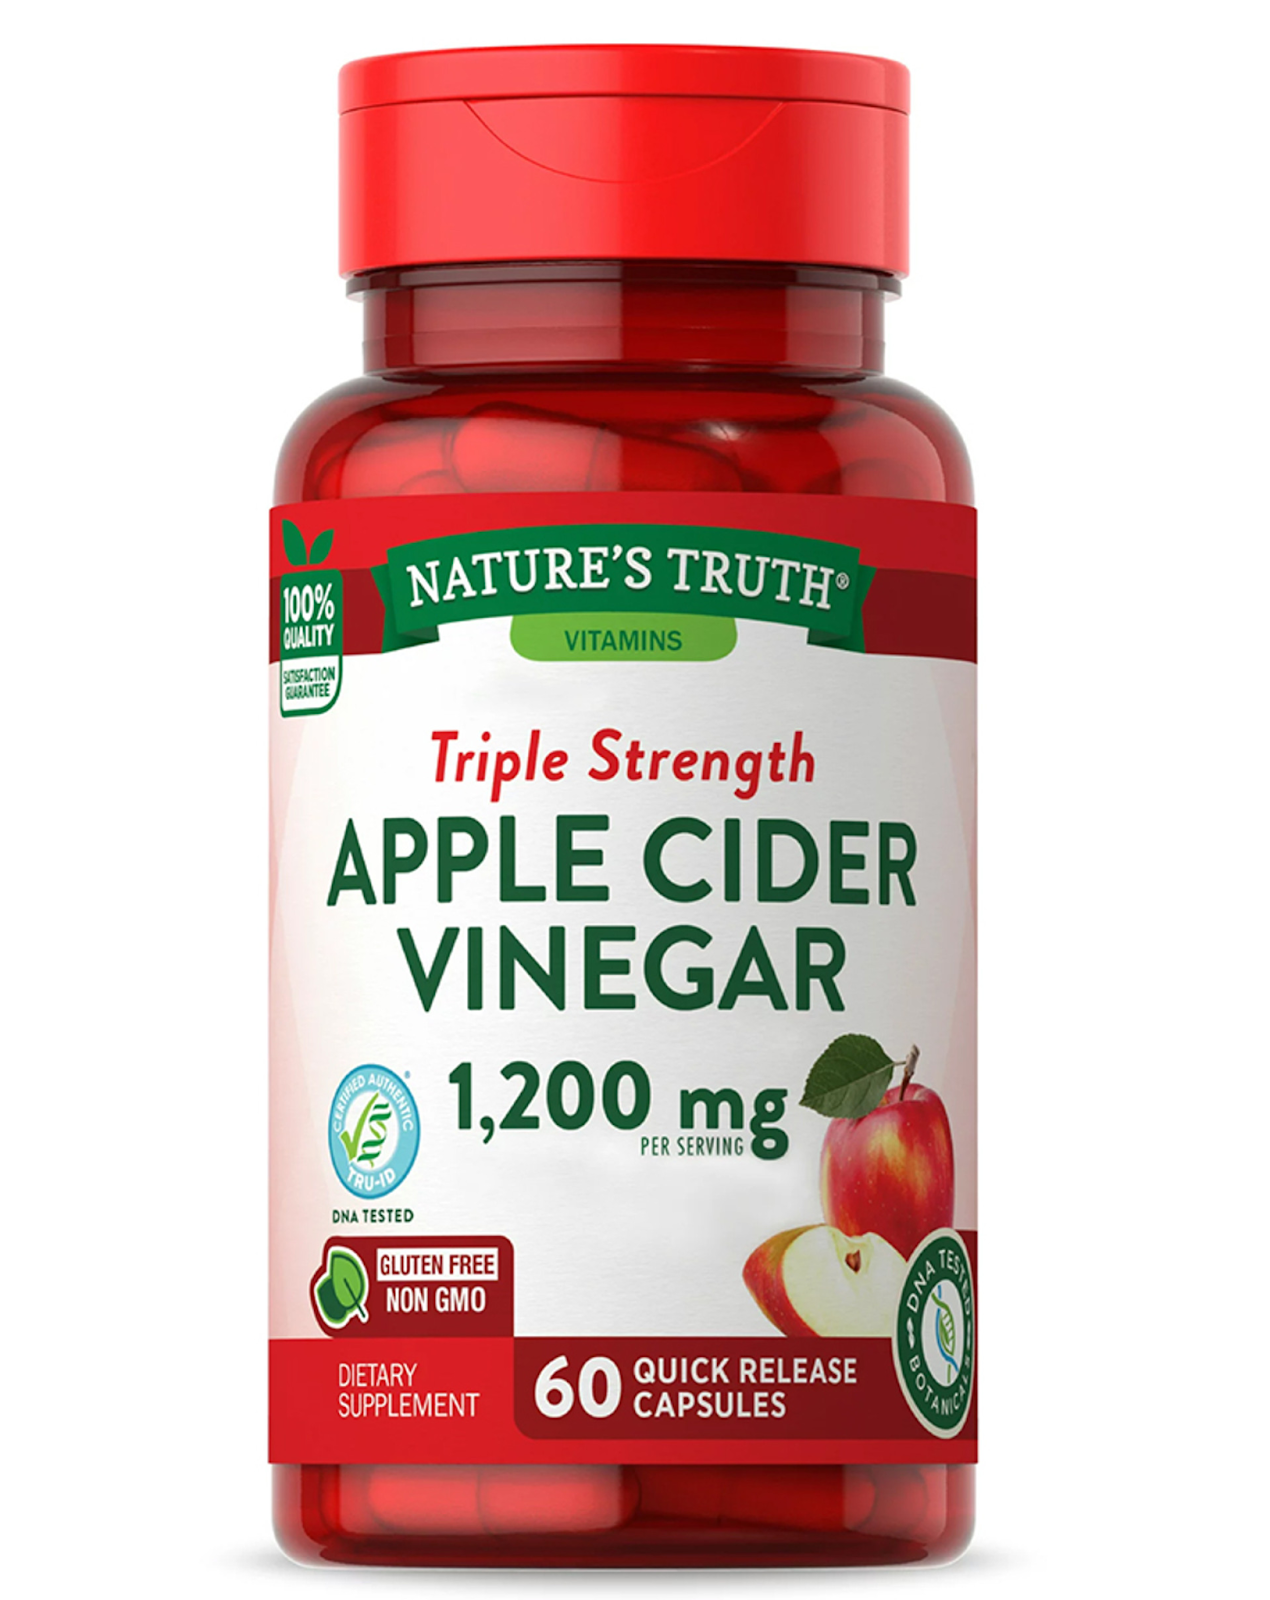 Nature's Truth Apple Cider Vinegar 1200 mg Quick Release Capsules Triple Strength - 60 ct